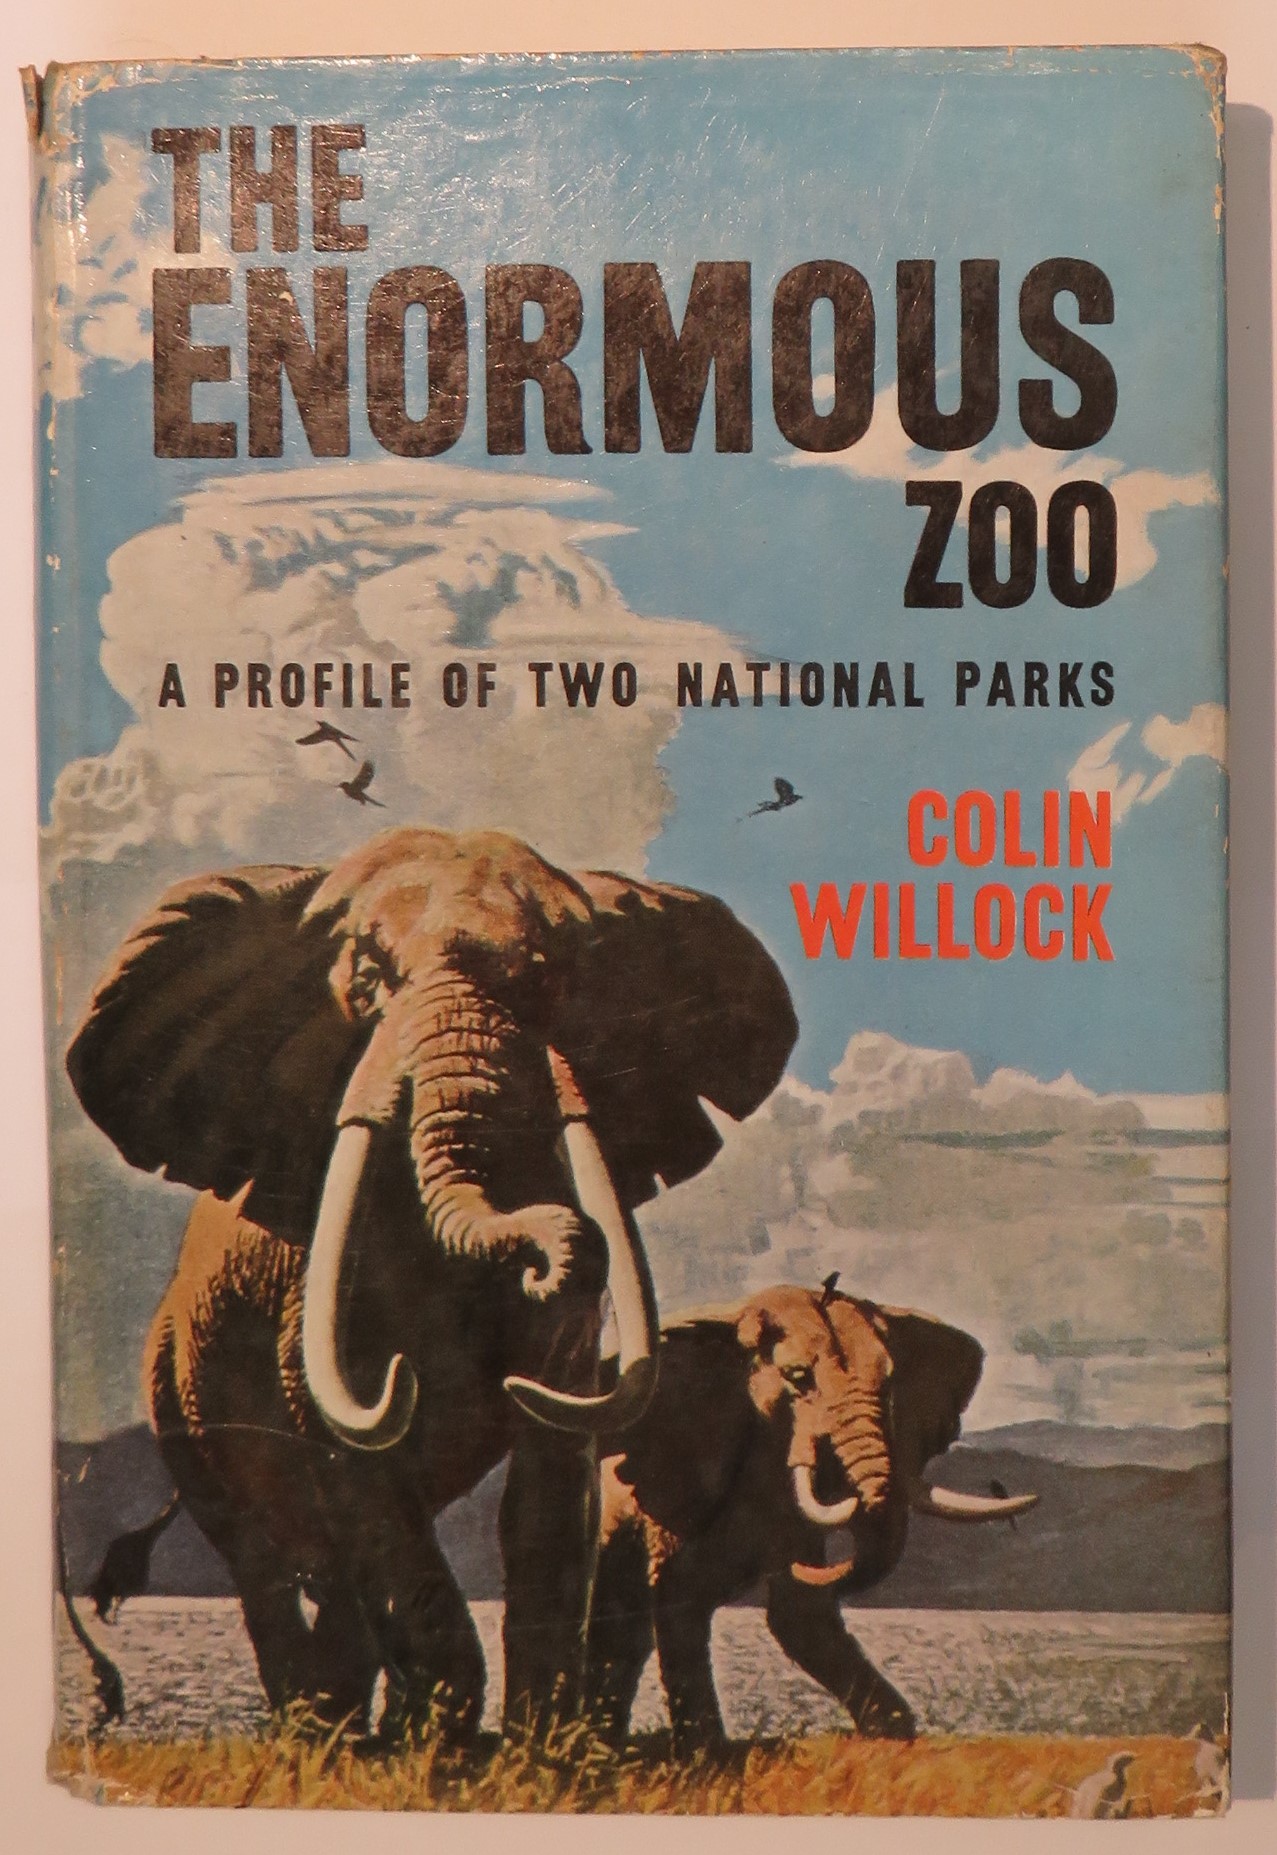 The Enormous Zoo